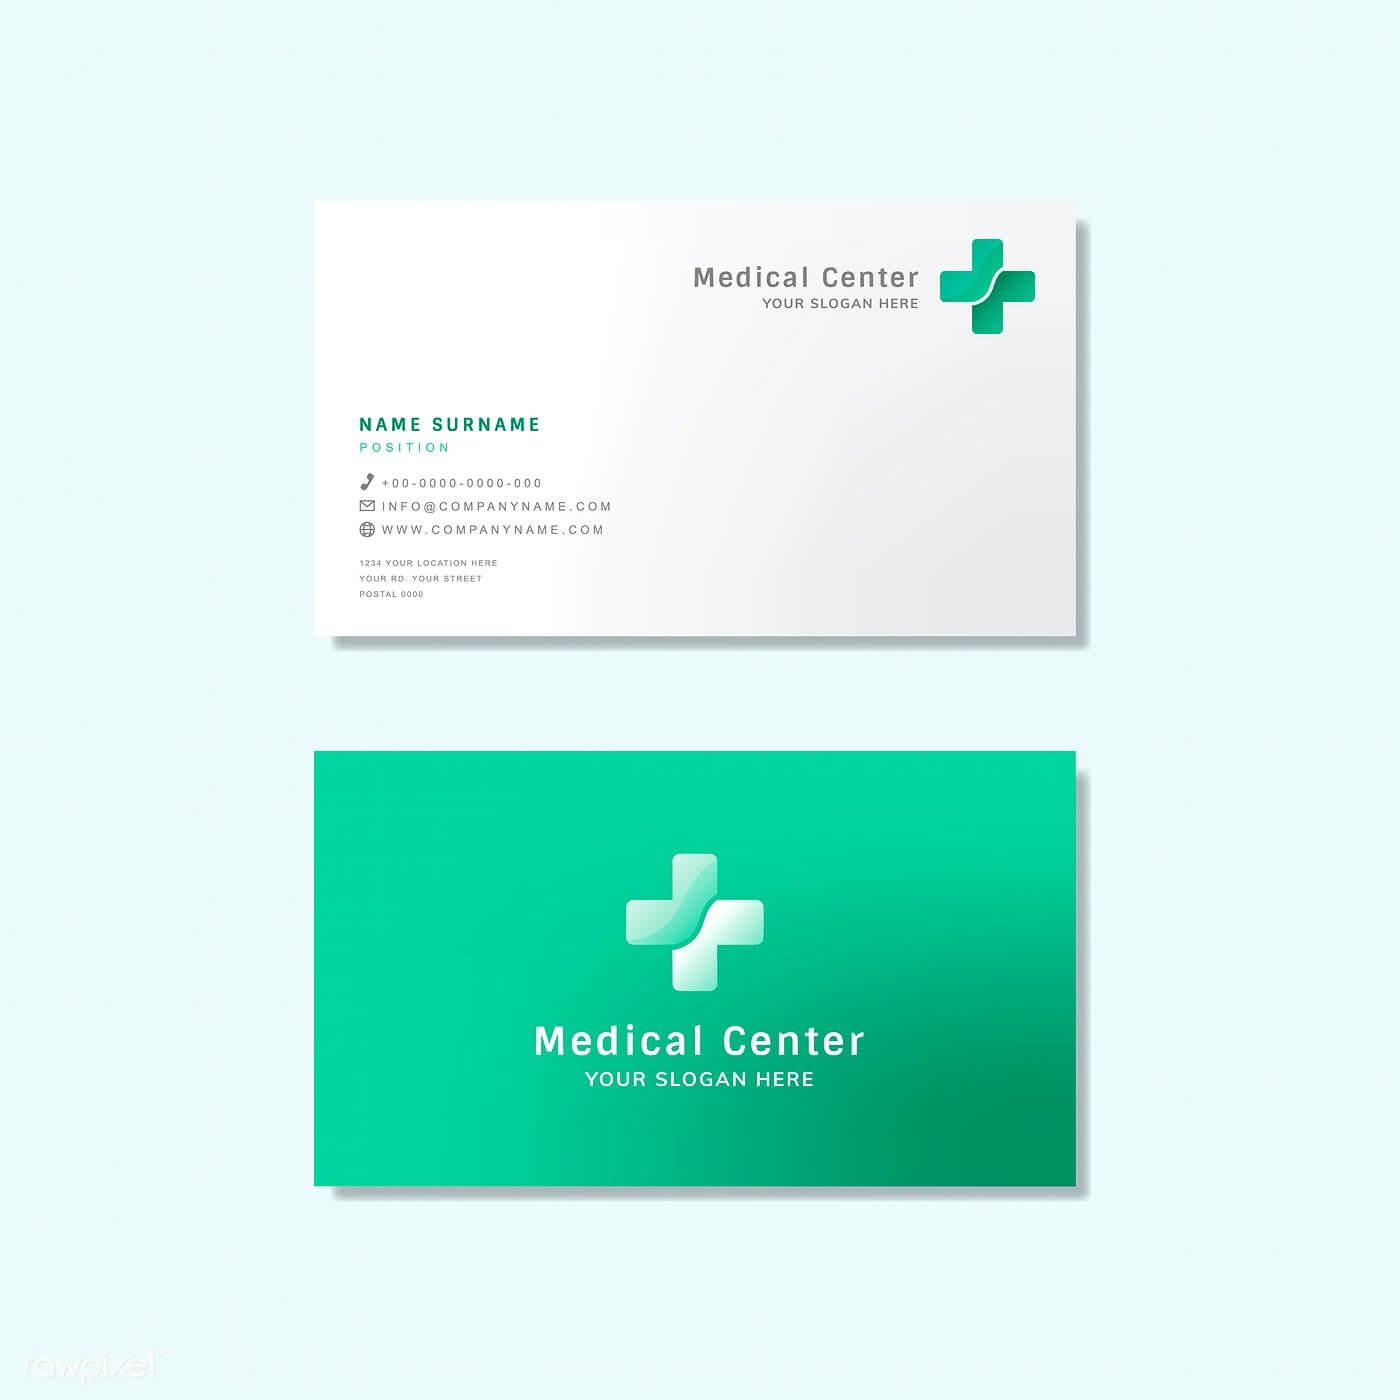 Medical Professional Business Card Design Mockup | Free Throughout Medical Business Cards Templates Free